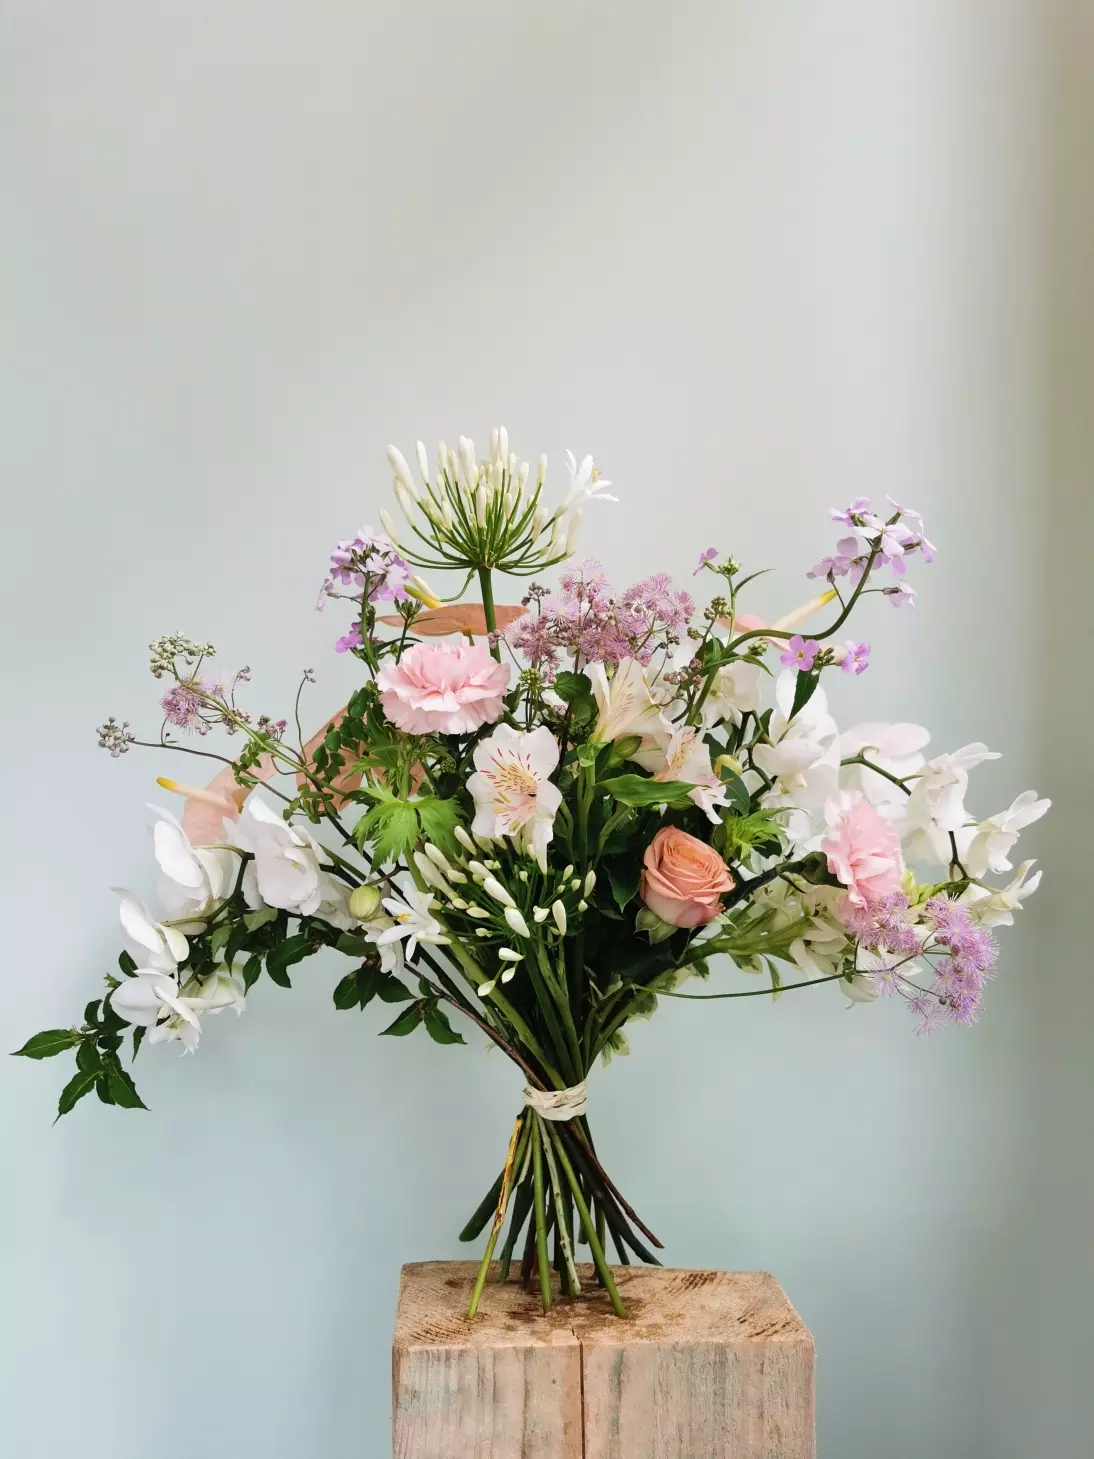 This is an original, surprising form of bouquet. The flowers are arranged horizontally, which gives a new arrangement possibility, allowing the bouquet to be presented from 2 sides.